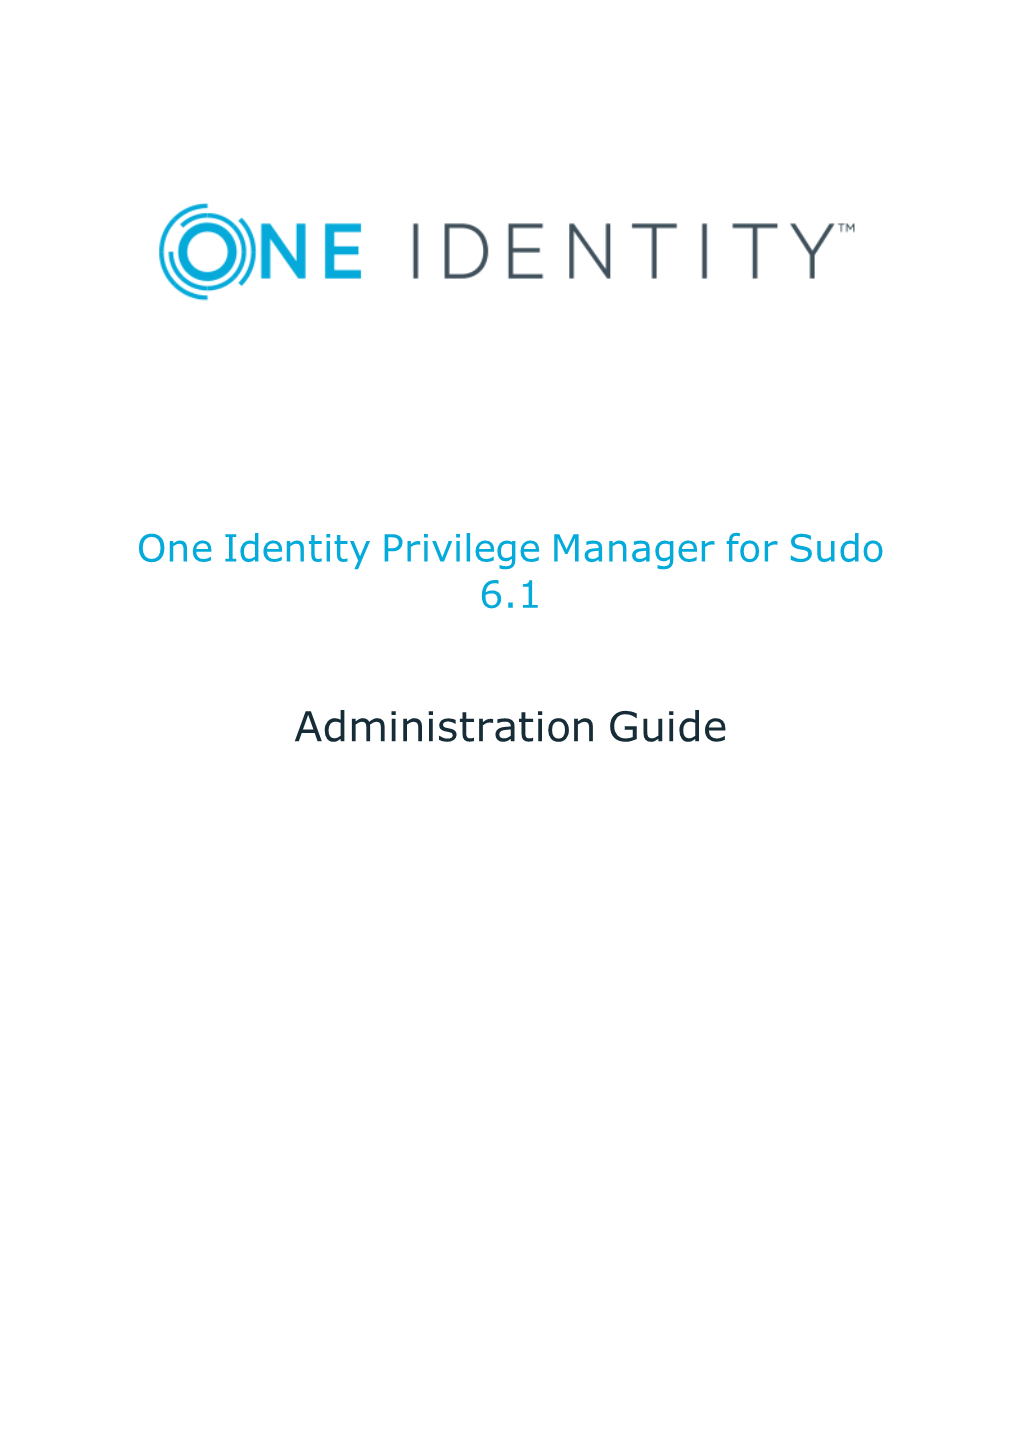 One Identity Privilege Manager for Sudo Administration Guide